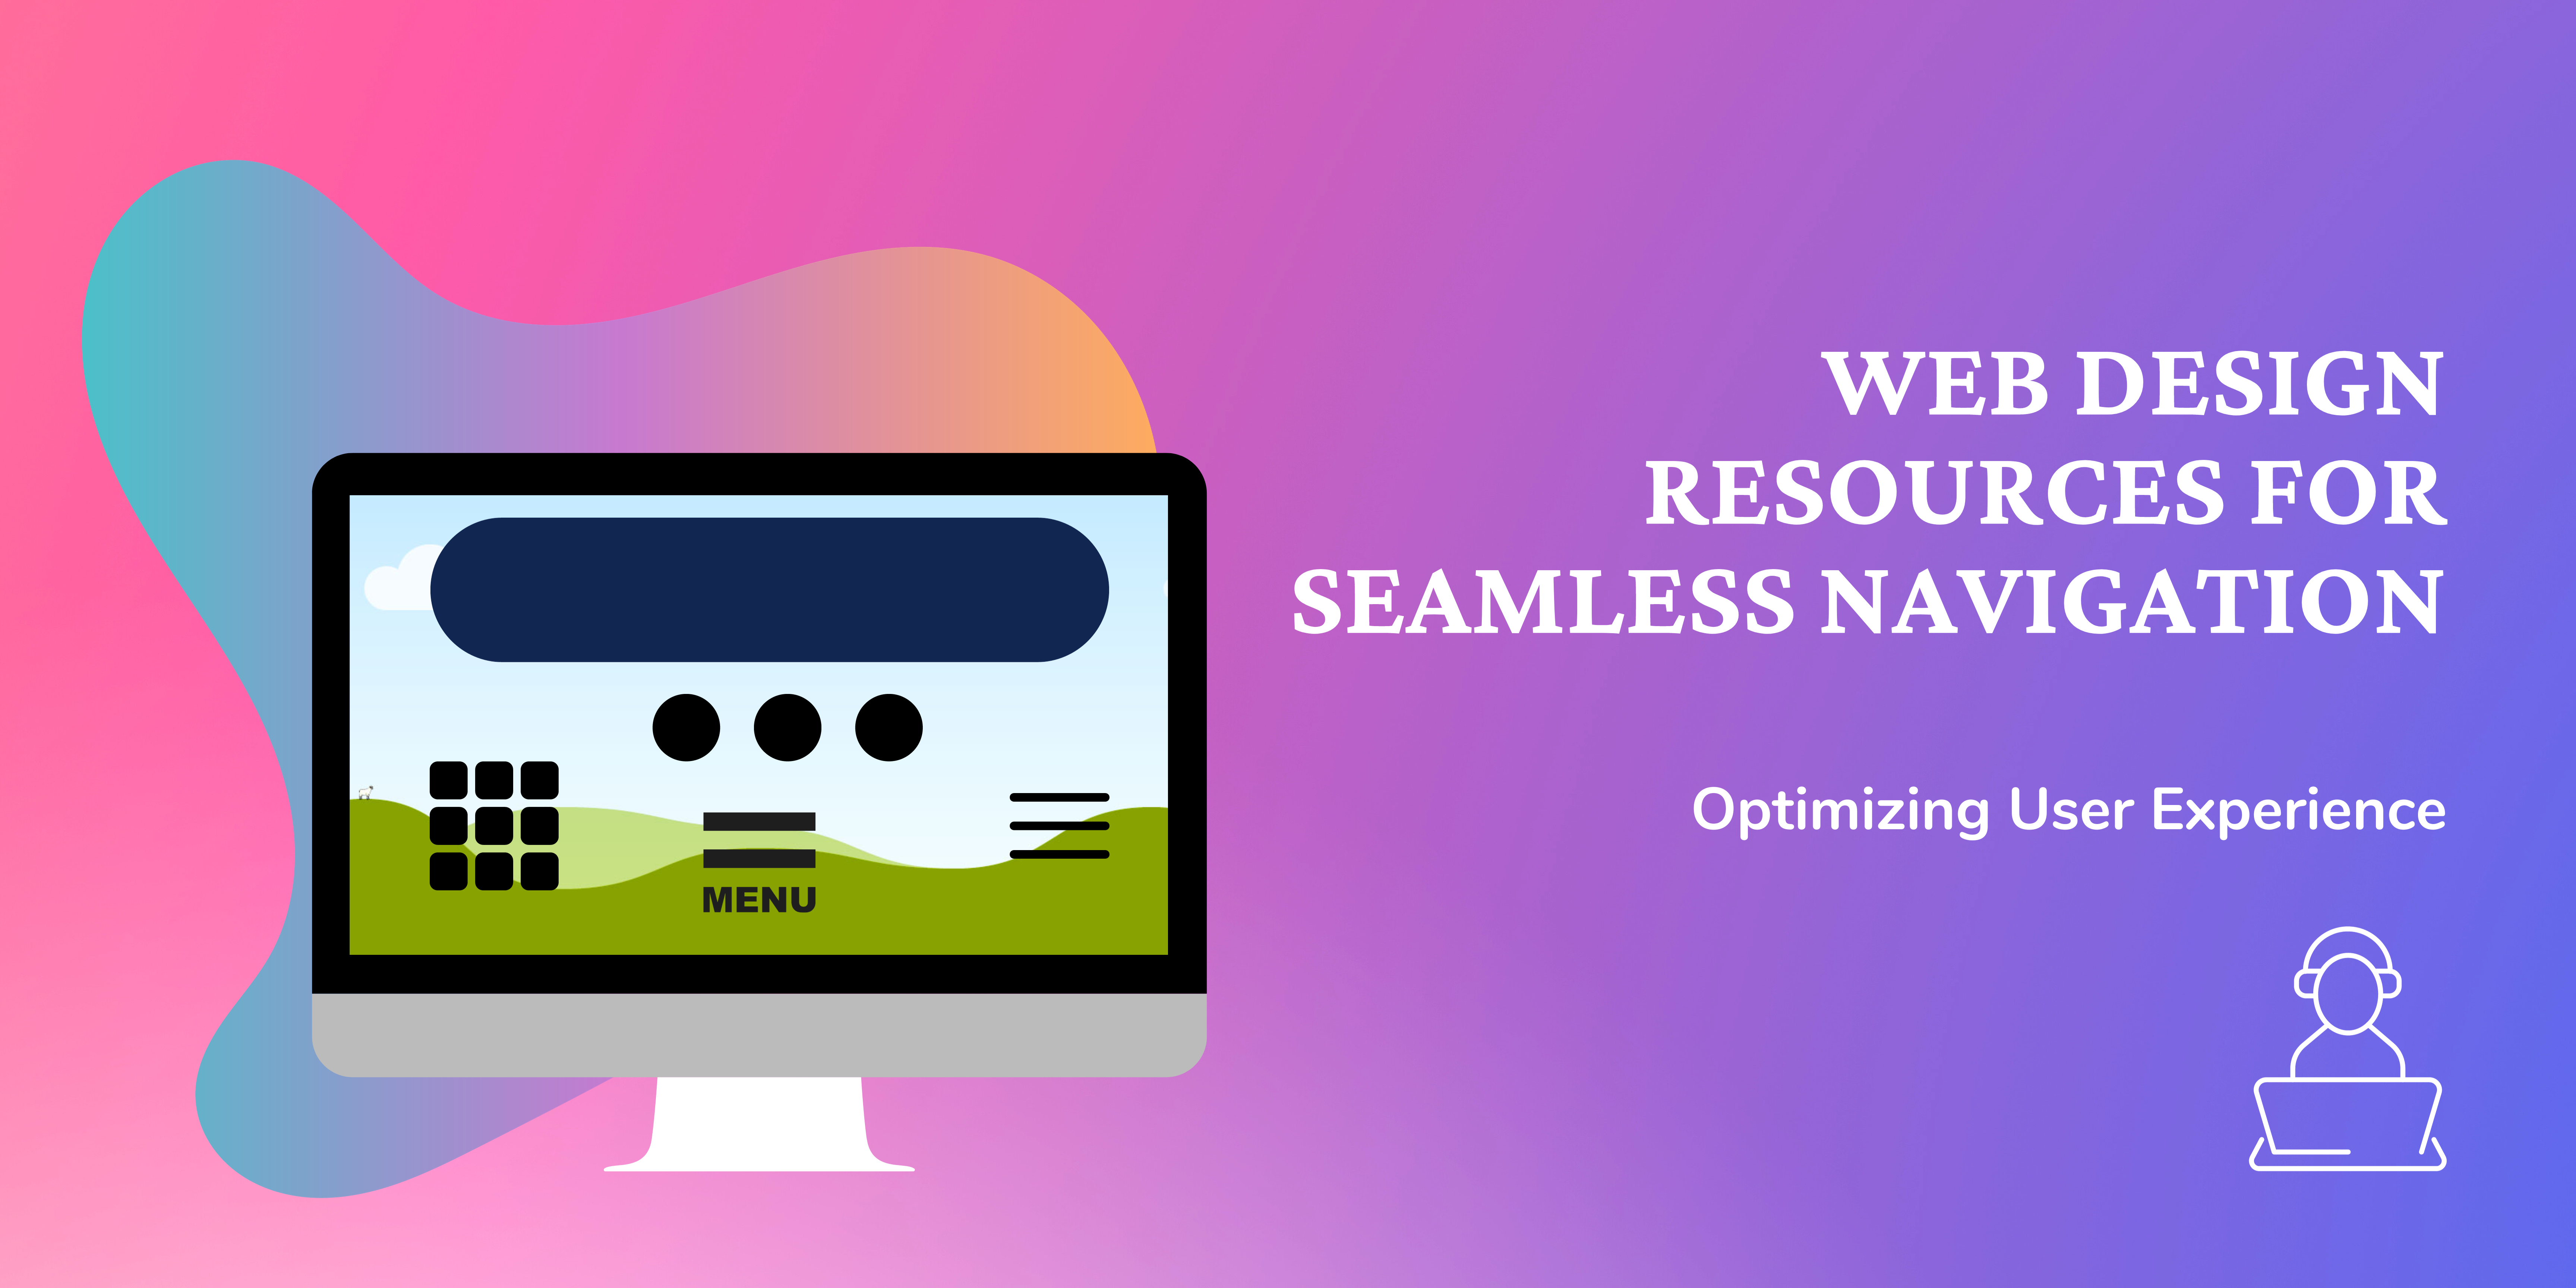 Optimizing User Experience: Web Design Resources for Seamless Navigation